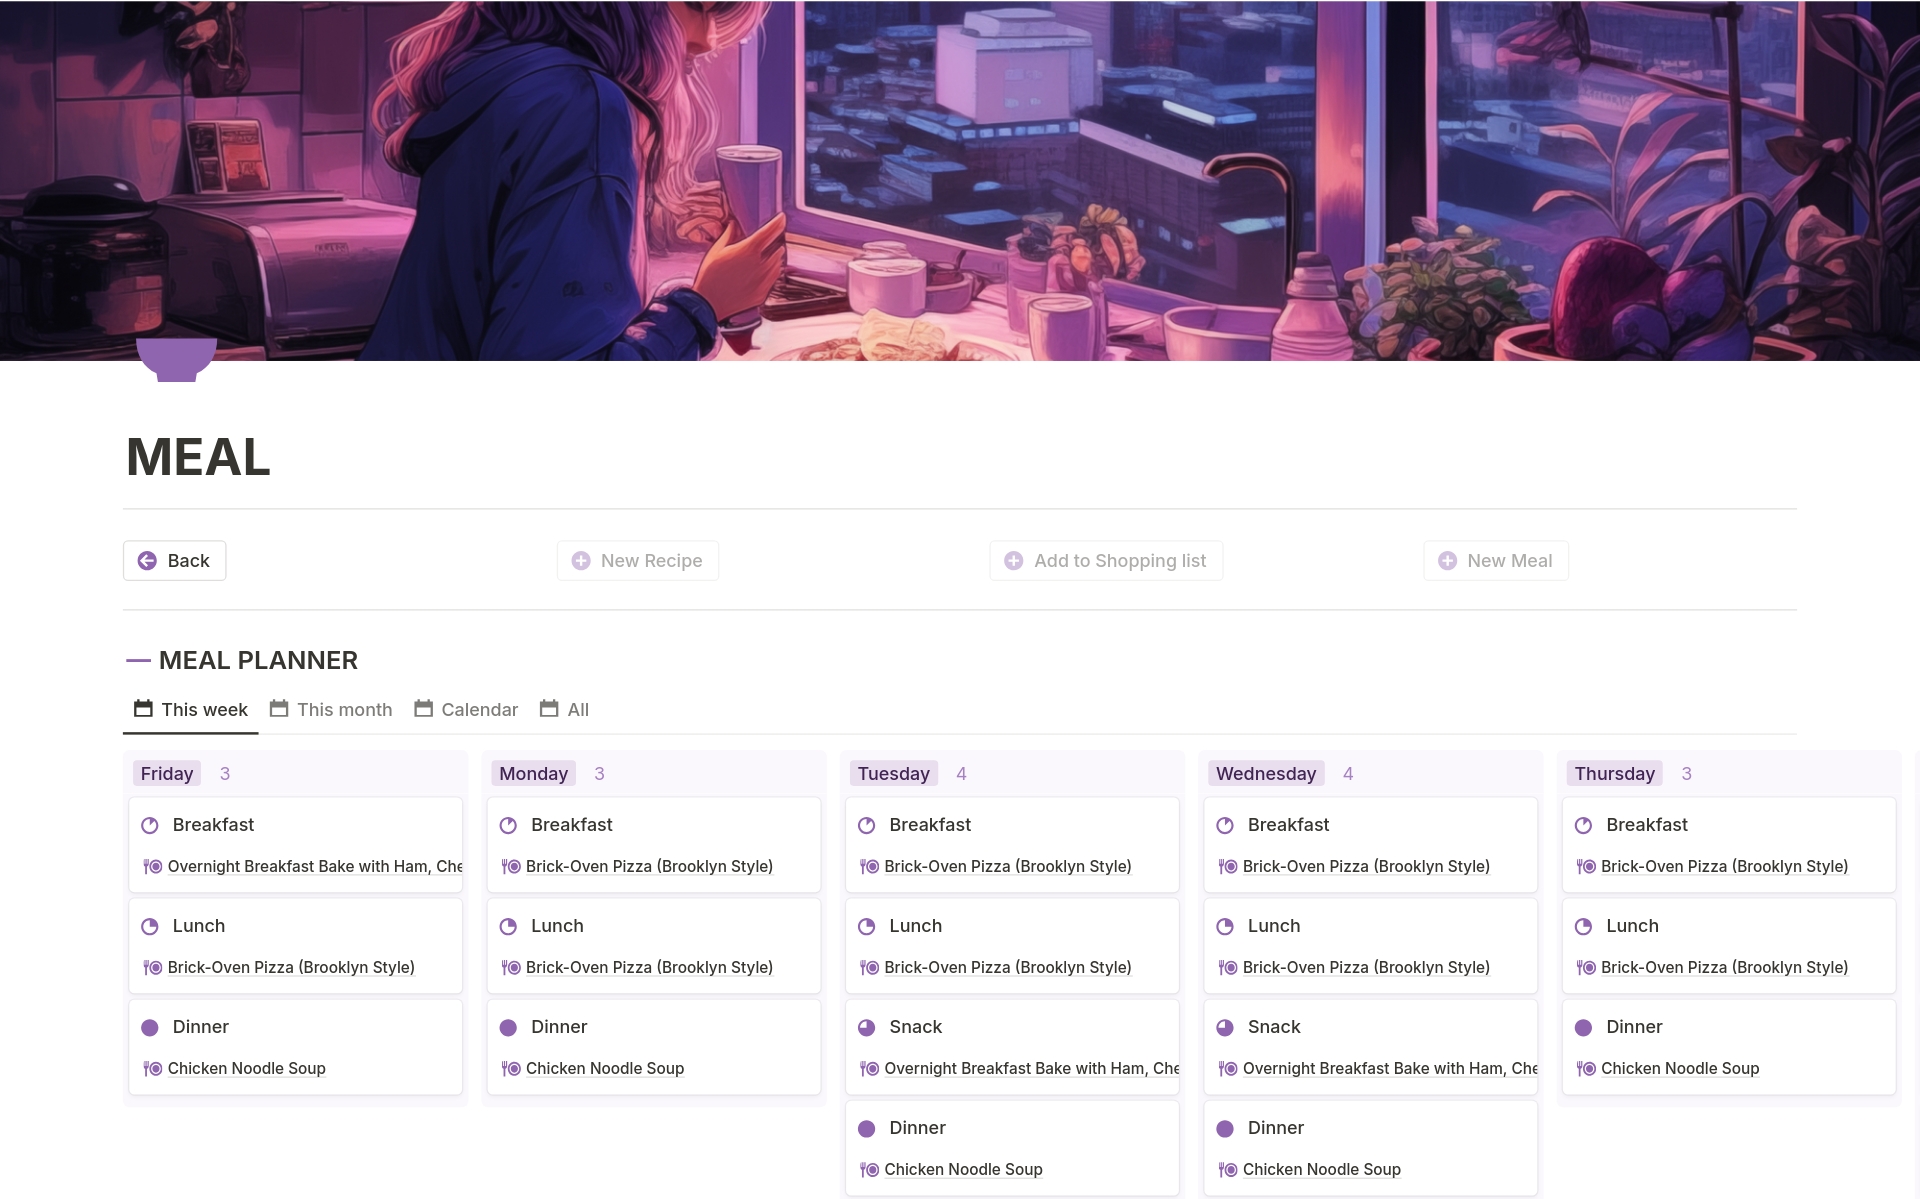 Your Aesthetic Notion Personal Dashboard in Lofi style.